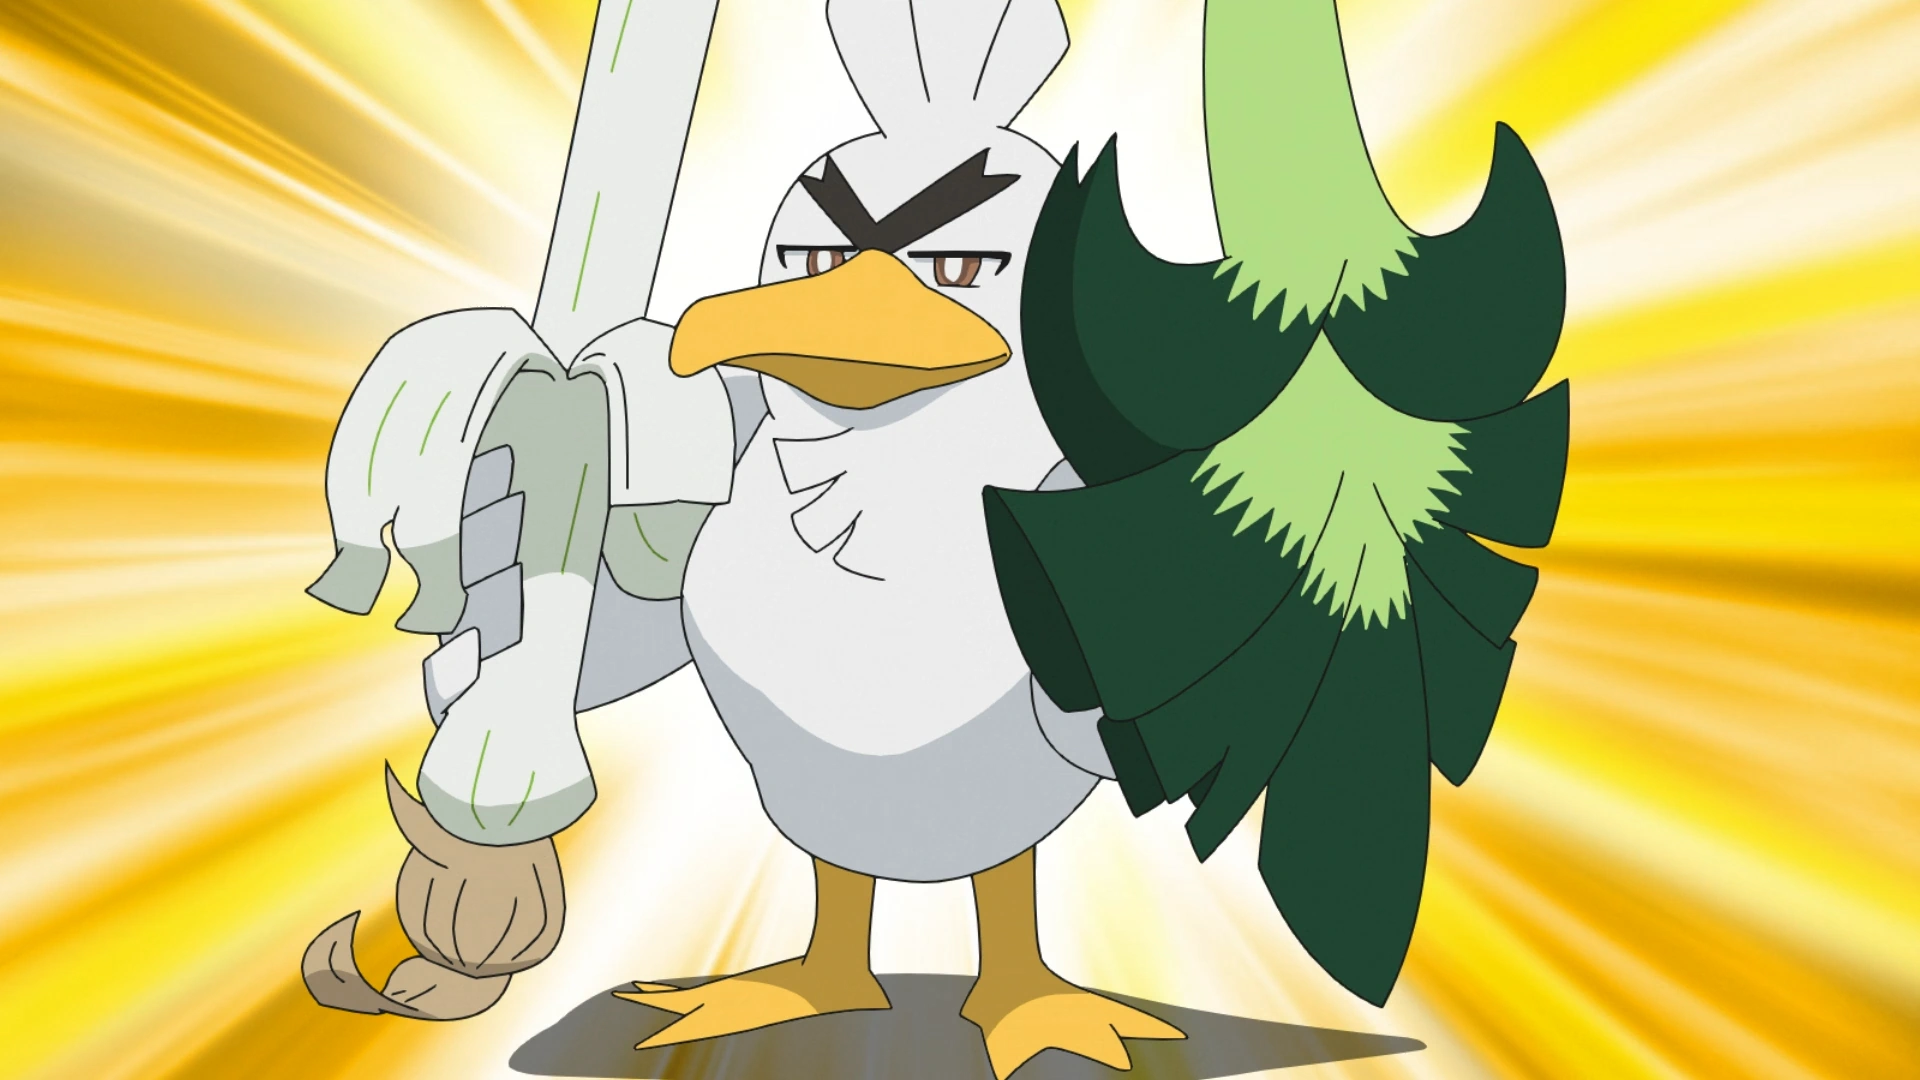 Pokemon GO: Farfetch'd is Now Available Worldwide